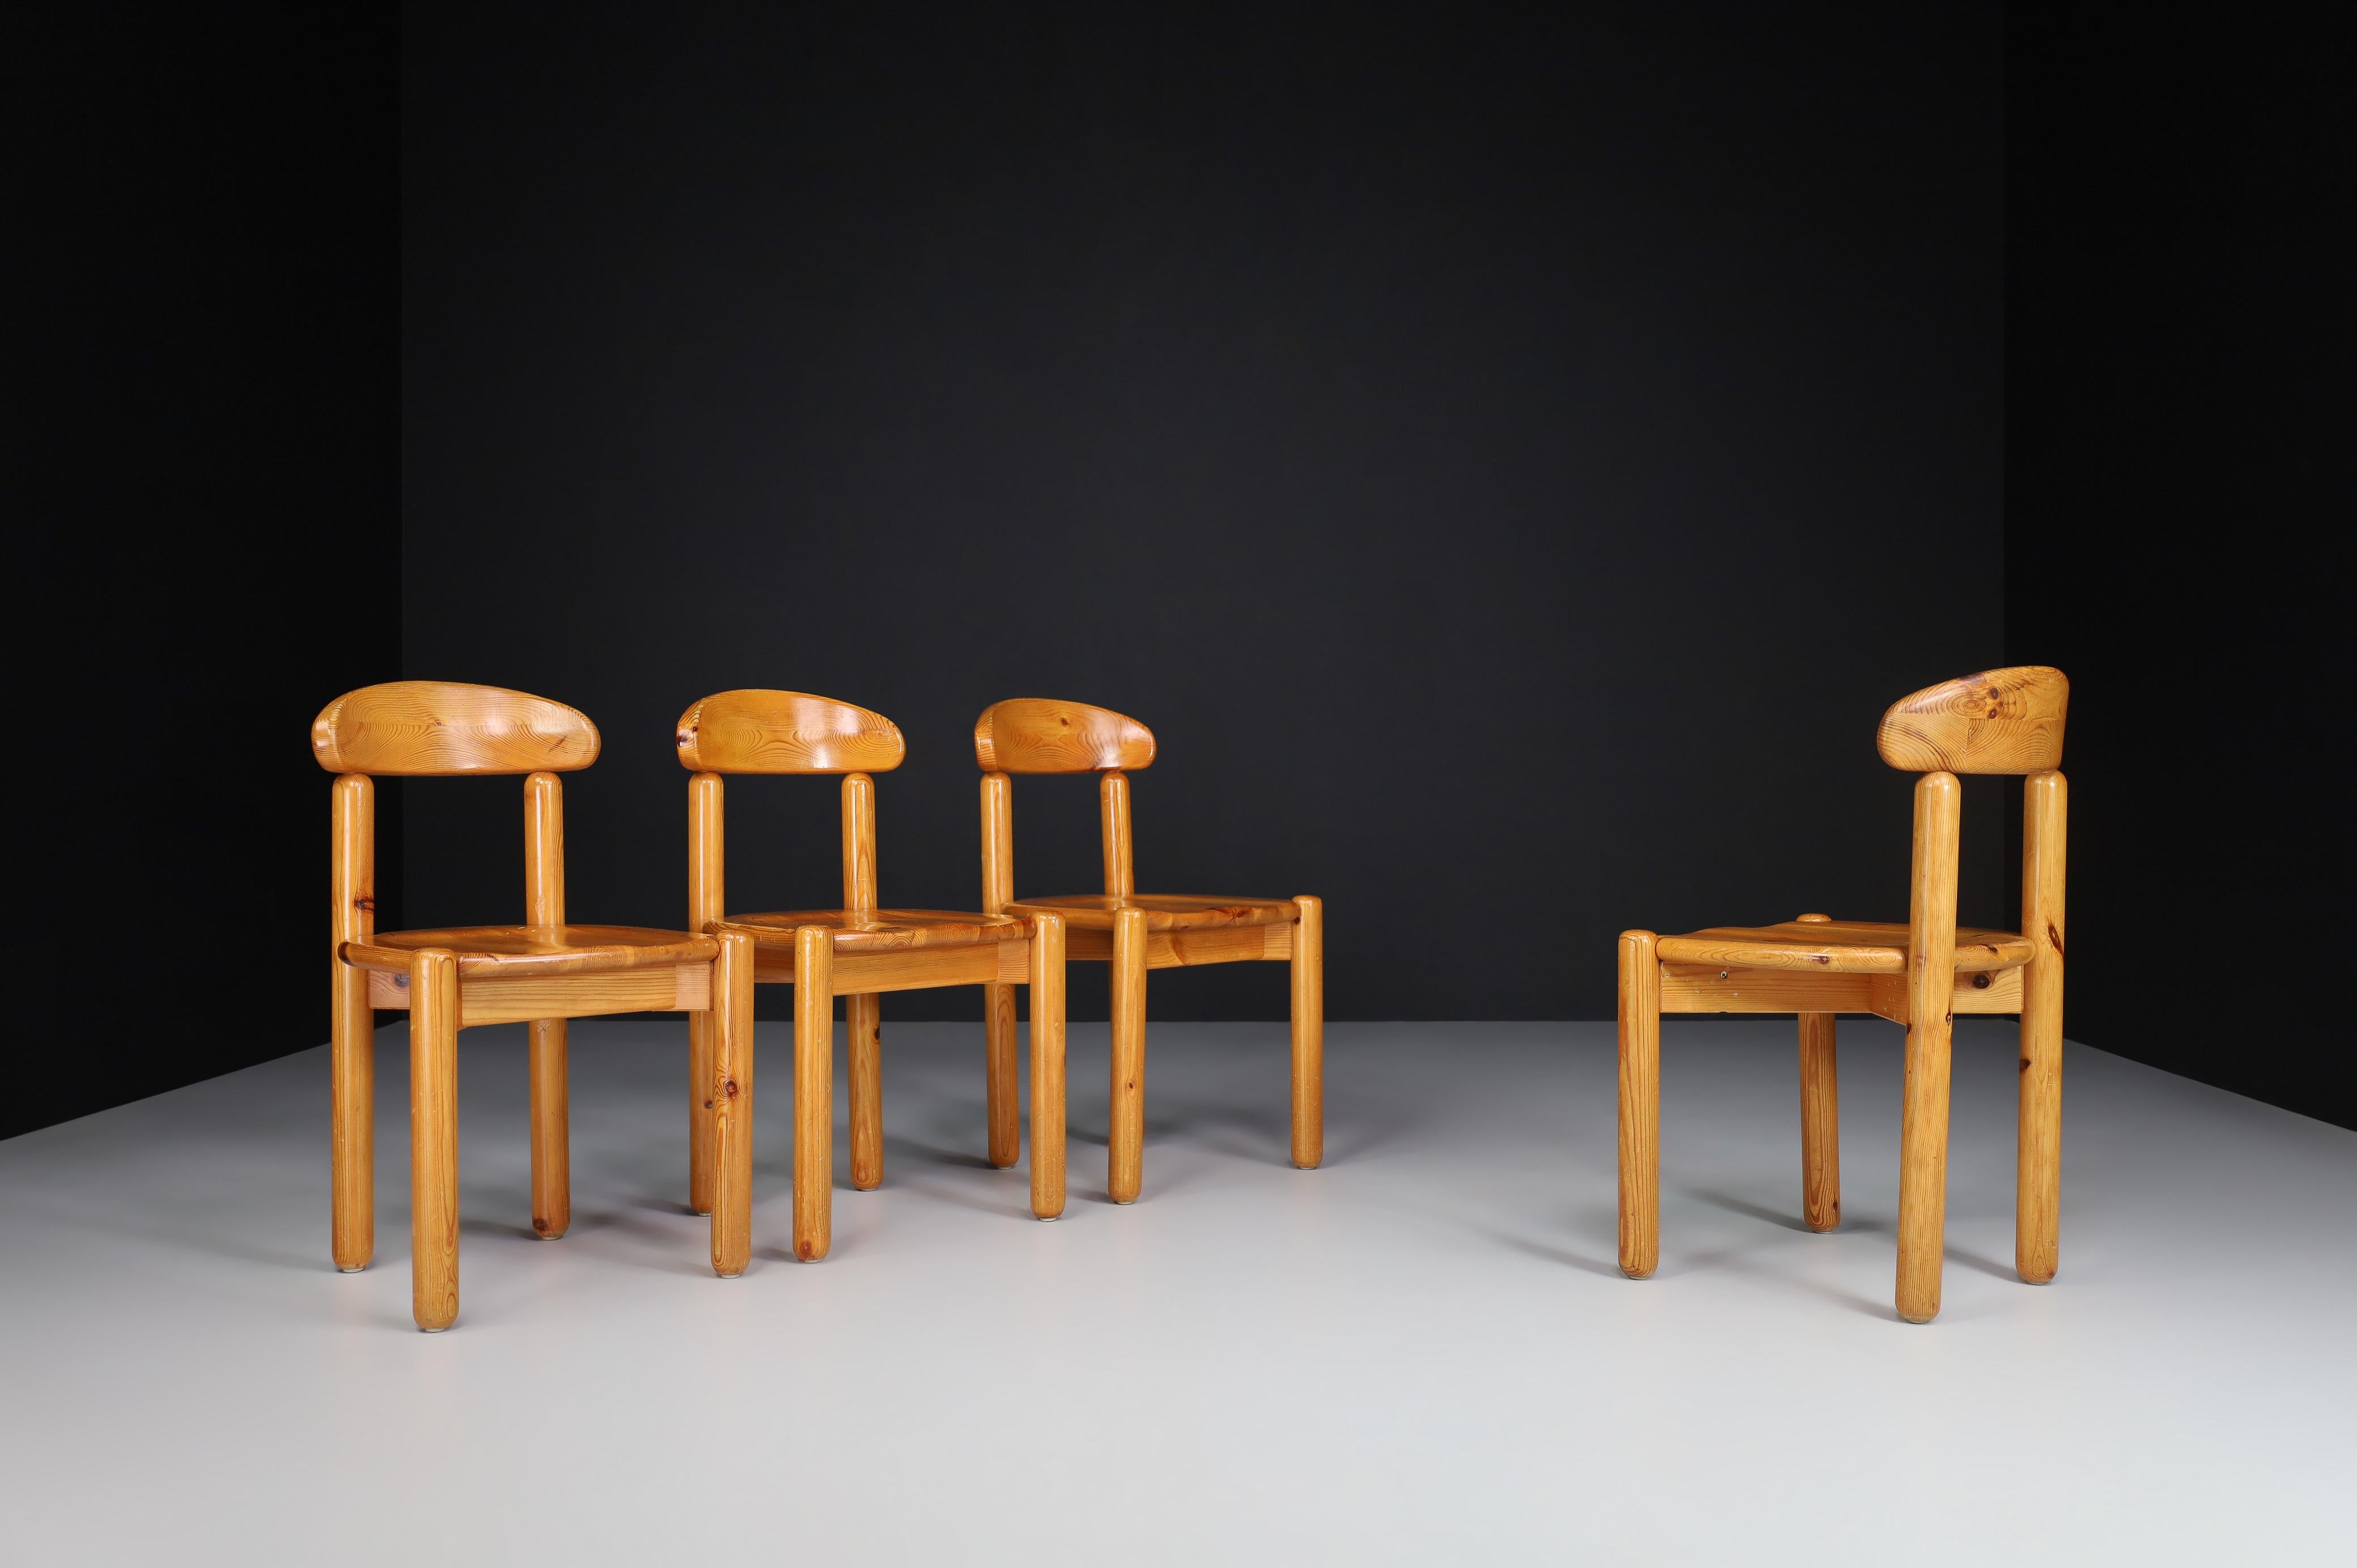 Rainer Daumiller set of four dining chairs in solid pine, 1970s, Denmark.

Rainer Daumiller set of four dining chairs in solid pine, 1970s Denmark. Lovely set of organic and natural armchairs in solid pine. A simplistic design with round seating